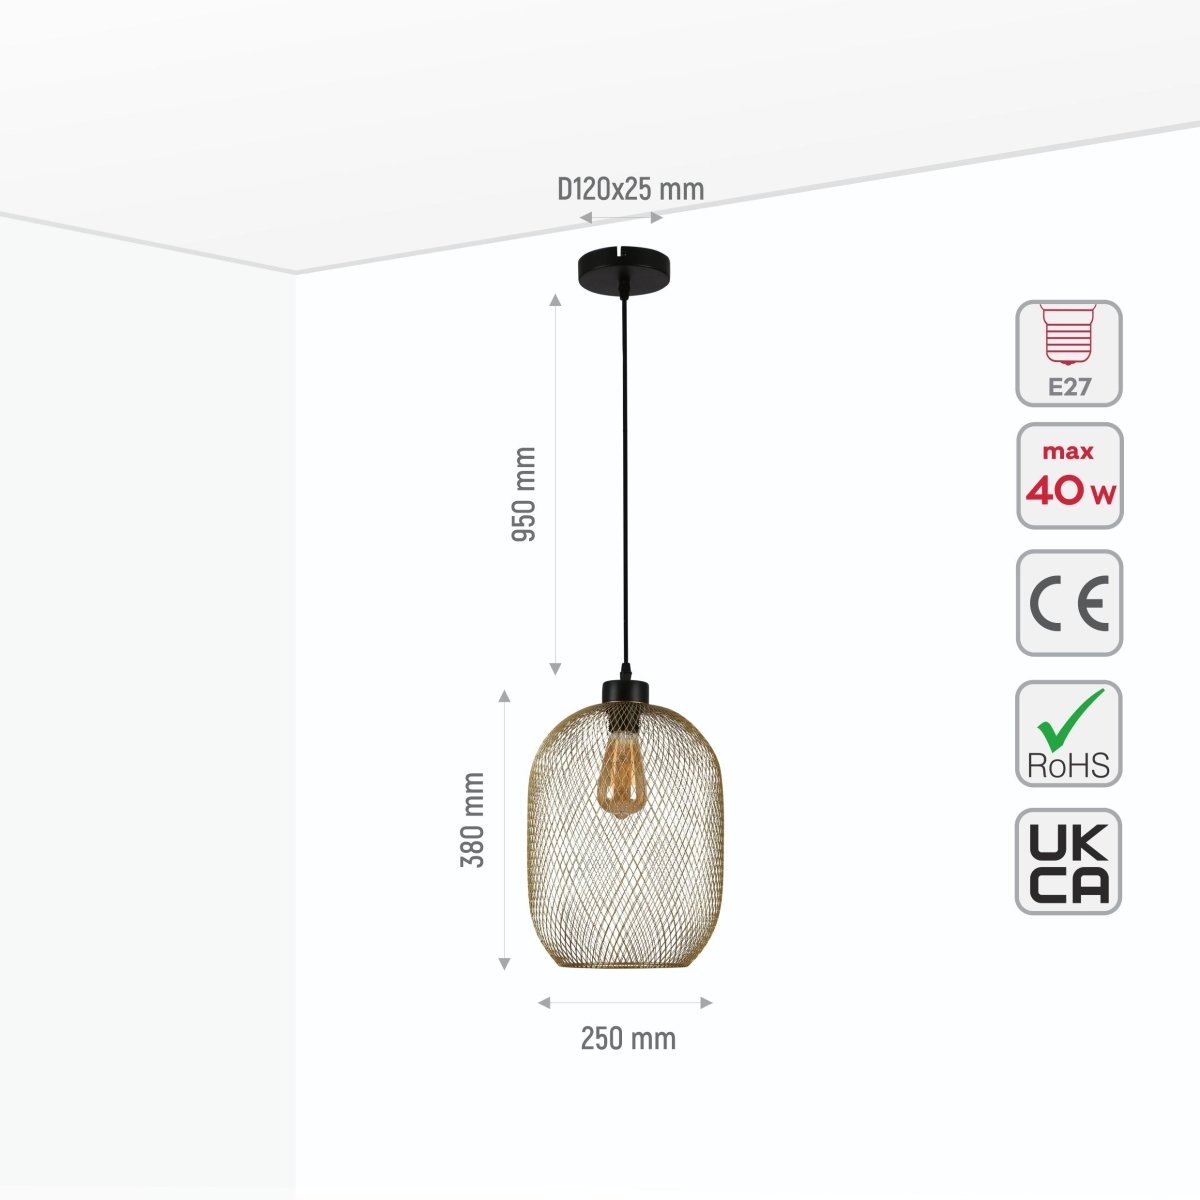 Size and specs of Mesh Cage Lantern Metal Pendant Ceiling Light E27 Gold D250 150-18242